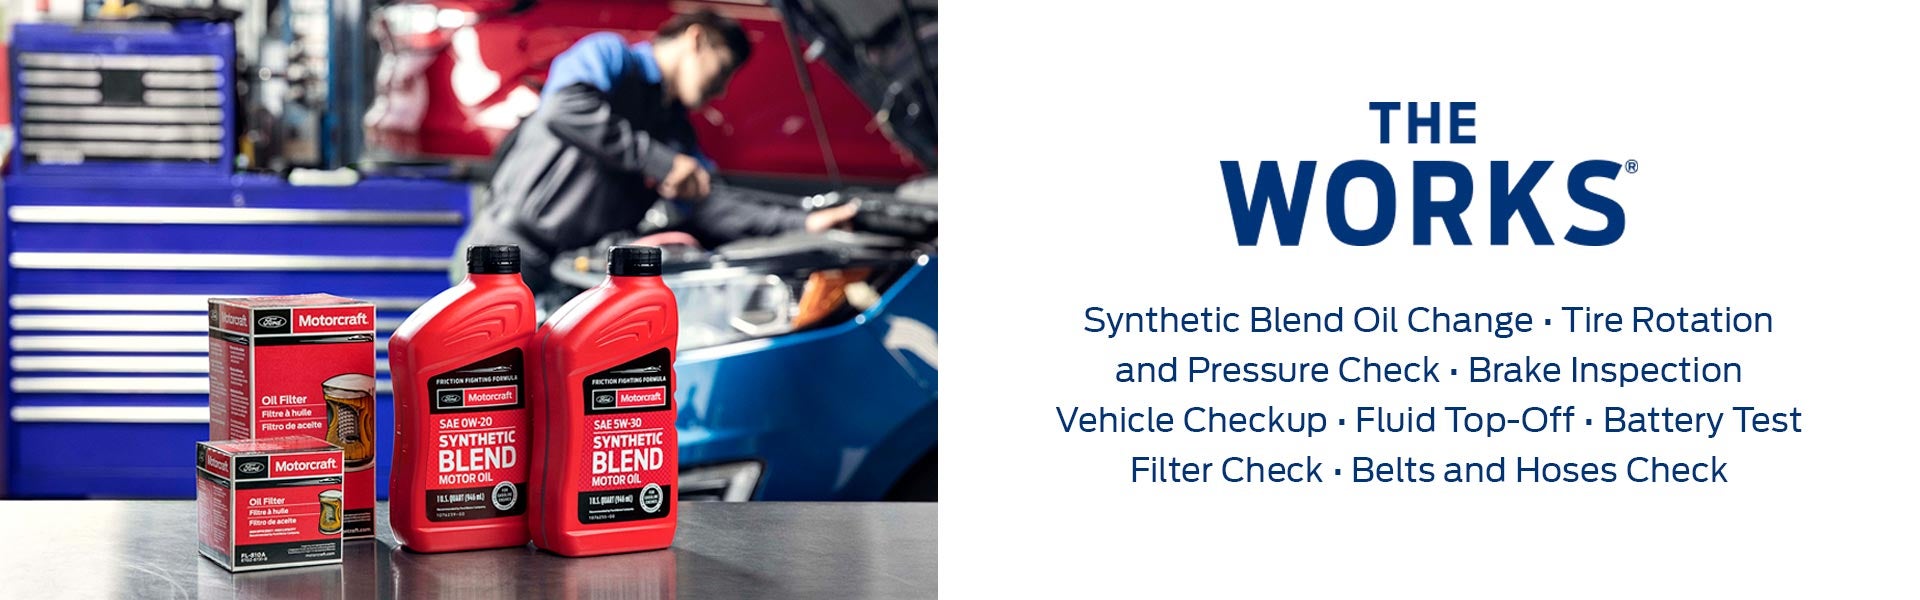 The Works® includes: Synthetic Blend Oil Change; Tire Rotation and Pressure Check; Brake Inspection; Vehicle Checkup; Fluid Top-Off; Battery Test; Filter Check; Belts and Hoses Check. Click to print this offer.